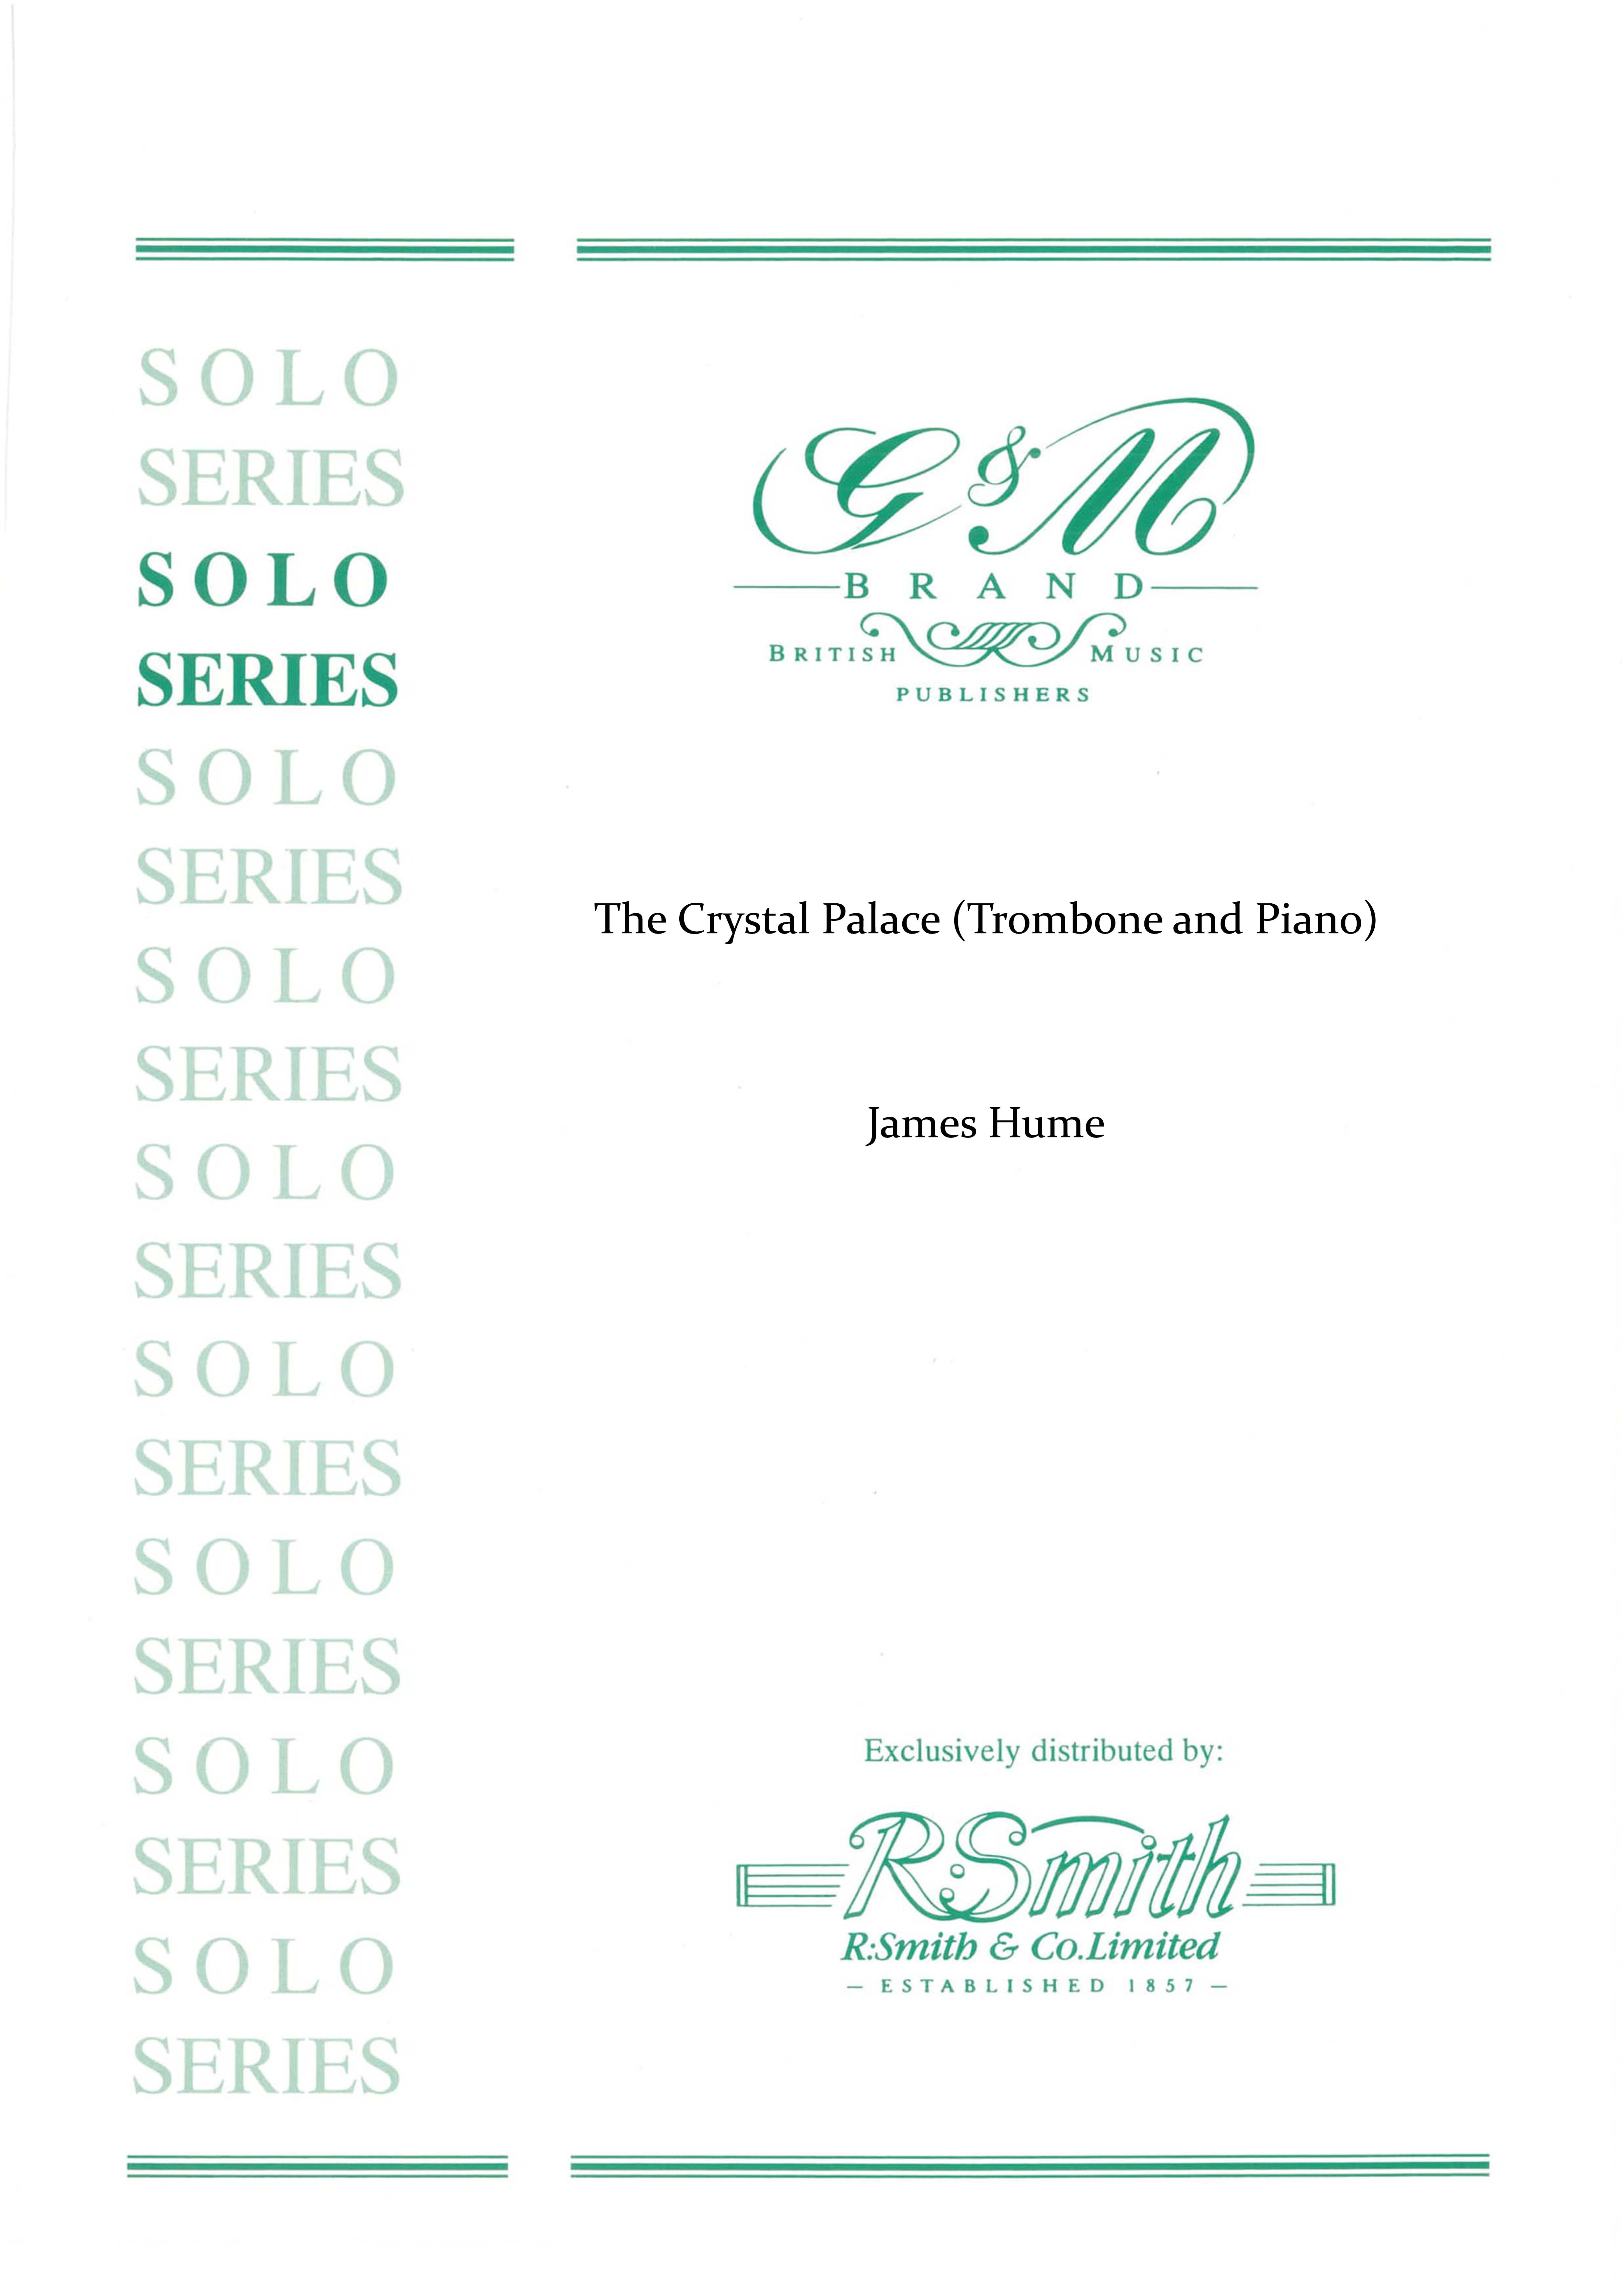 The Crystal Palace (Trombone and Piano)